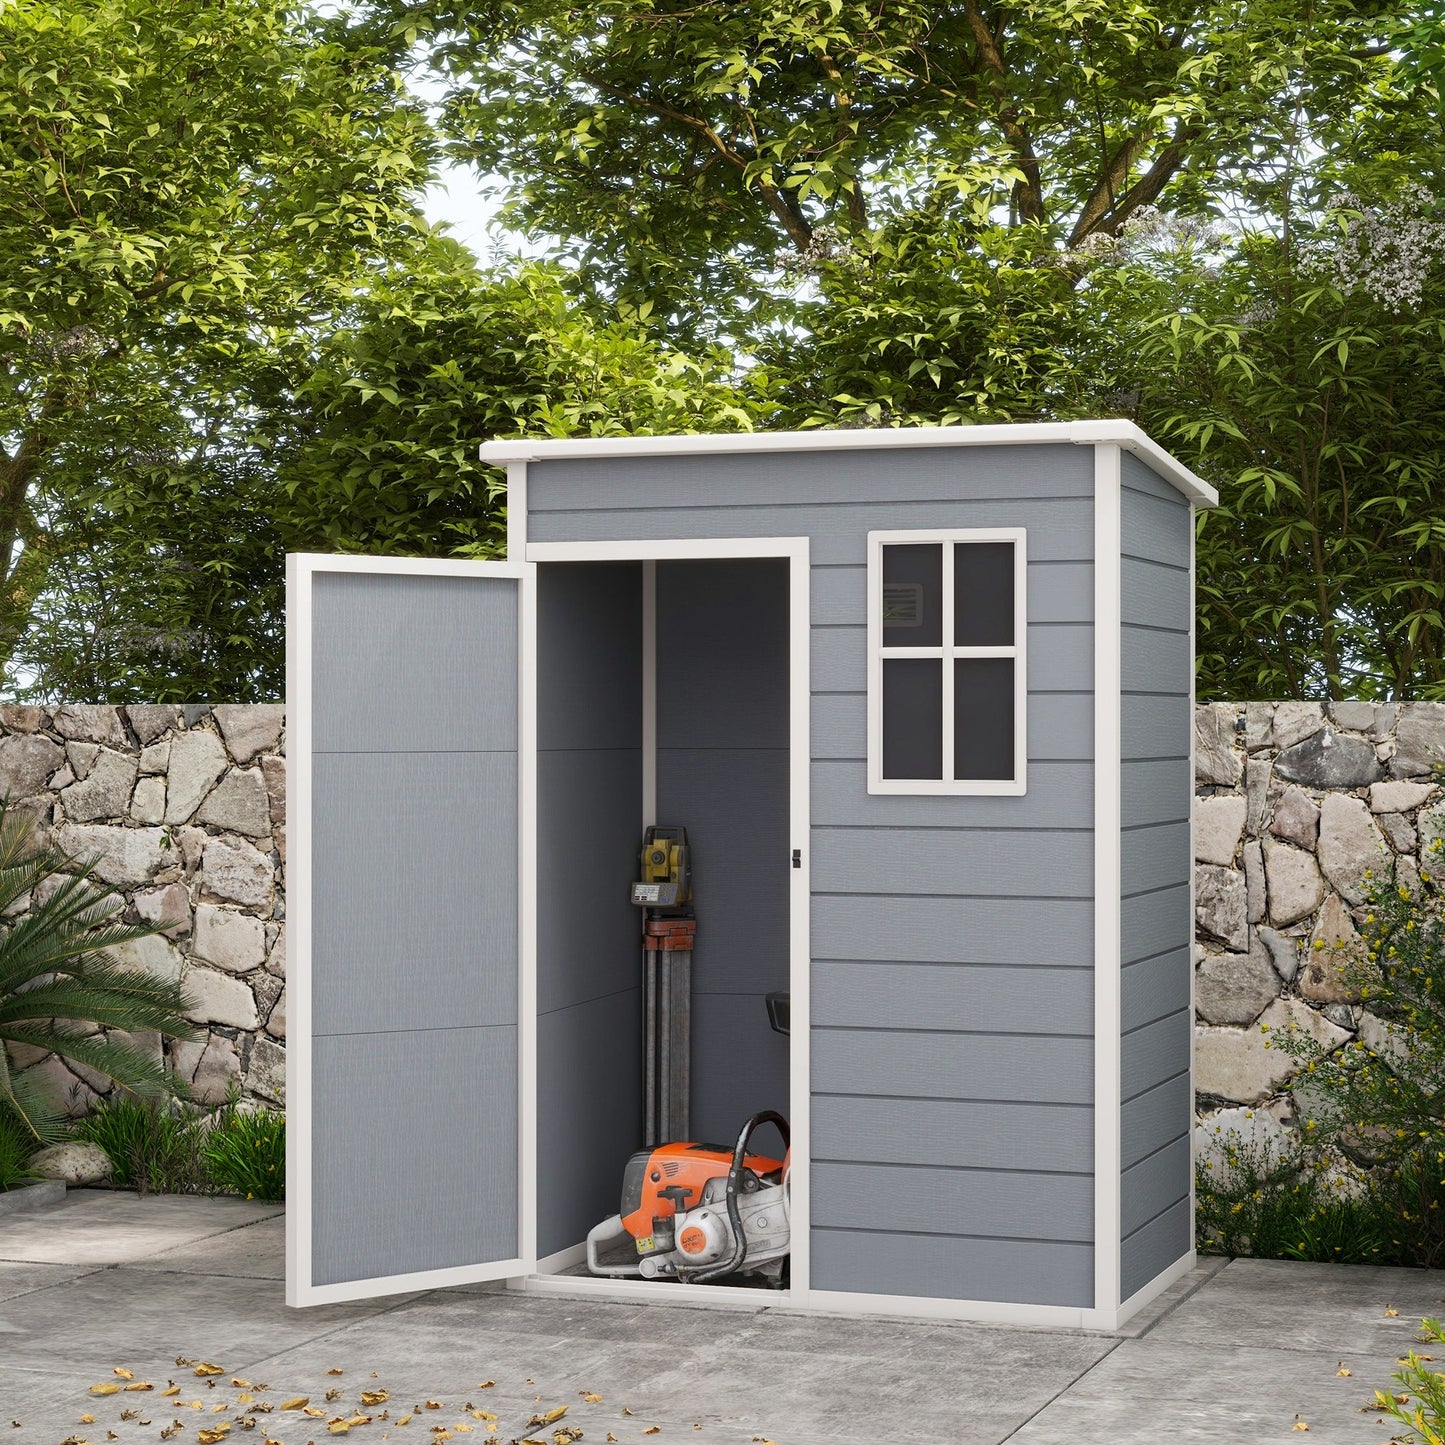 -Outsunny Garden Shed, 5'x3' Outdoor Storage Shed with Lockable Doors & Vent, Metal Utility Tool Shed for Backyard, Patio, Gray - Outdoor Style Company